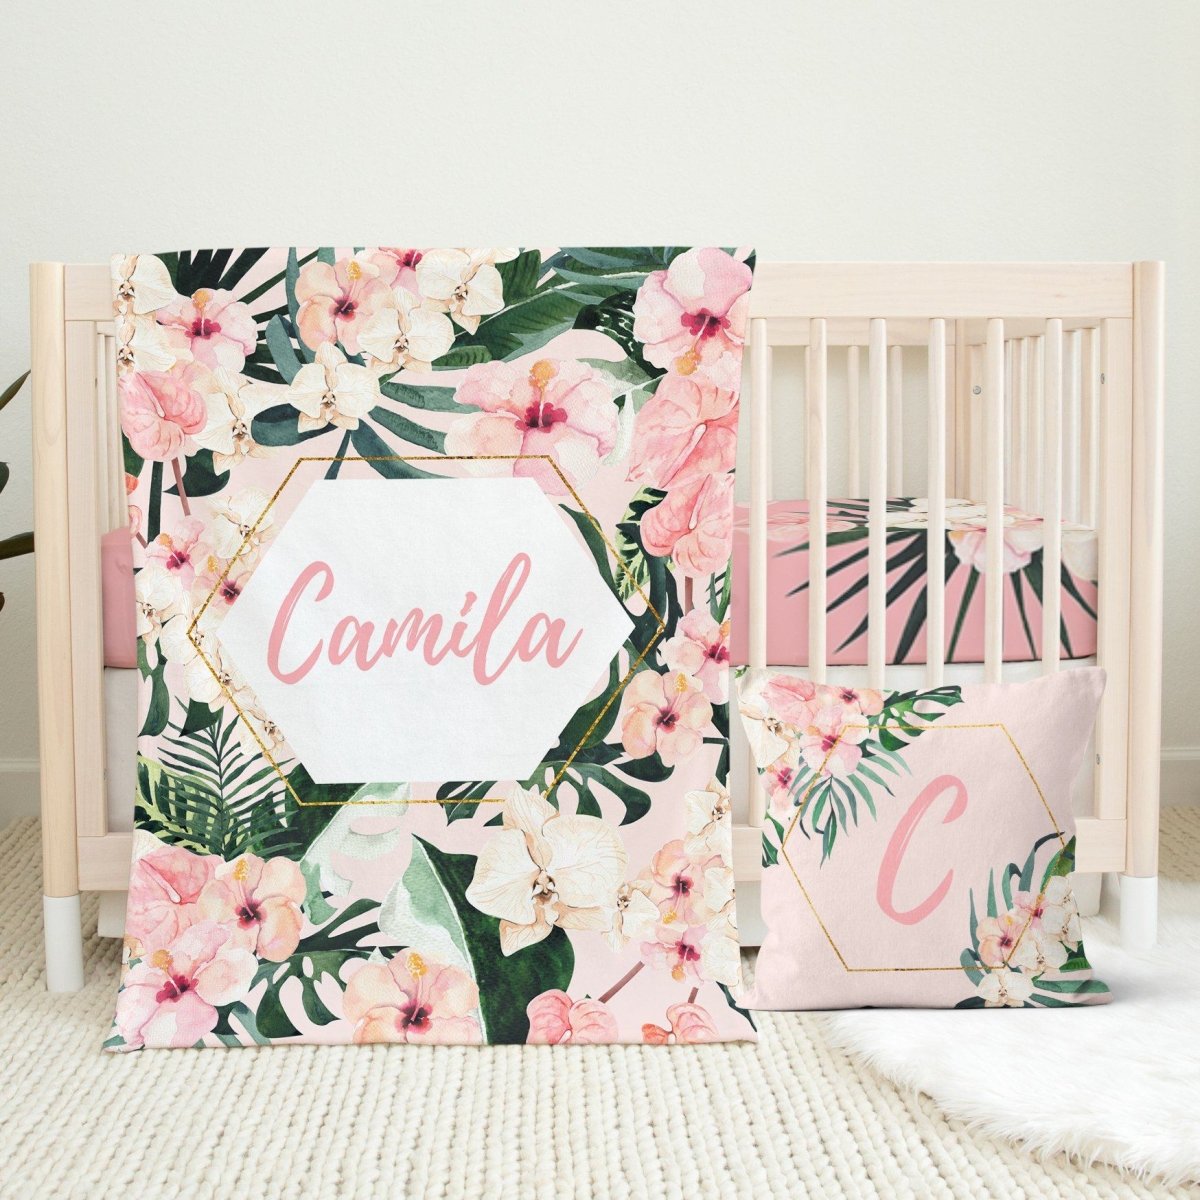 Tropical Floral Personalized Minky Blanket - gender_girl, Personalized_Yes, text